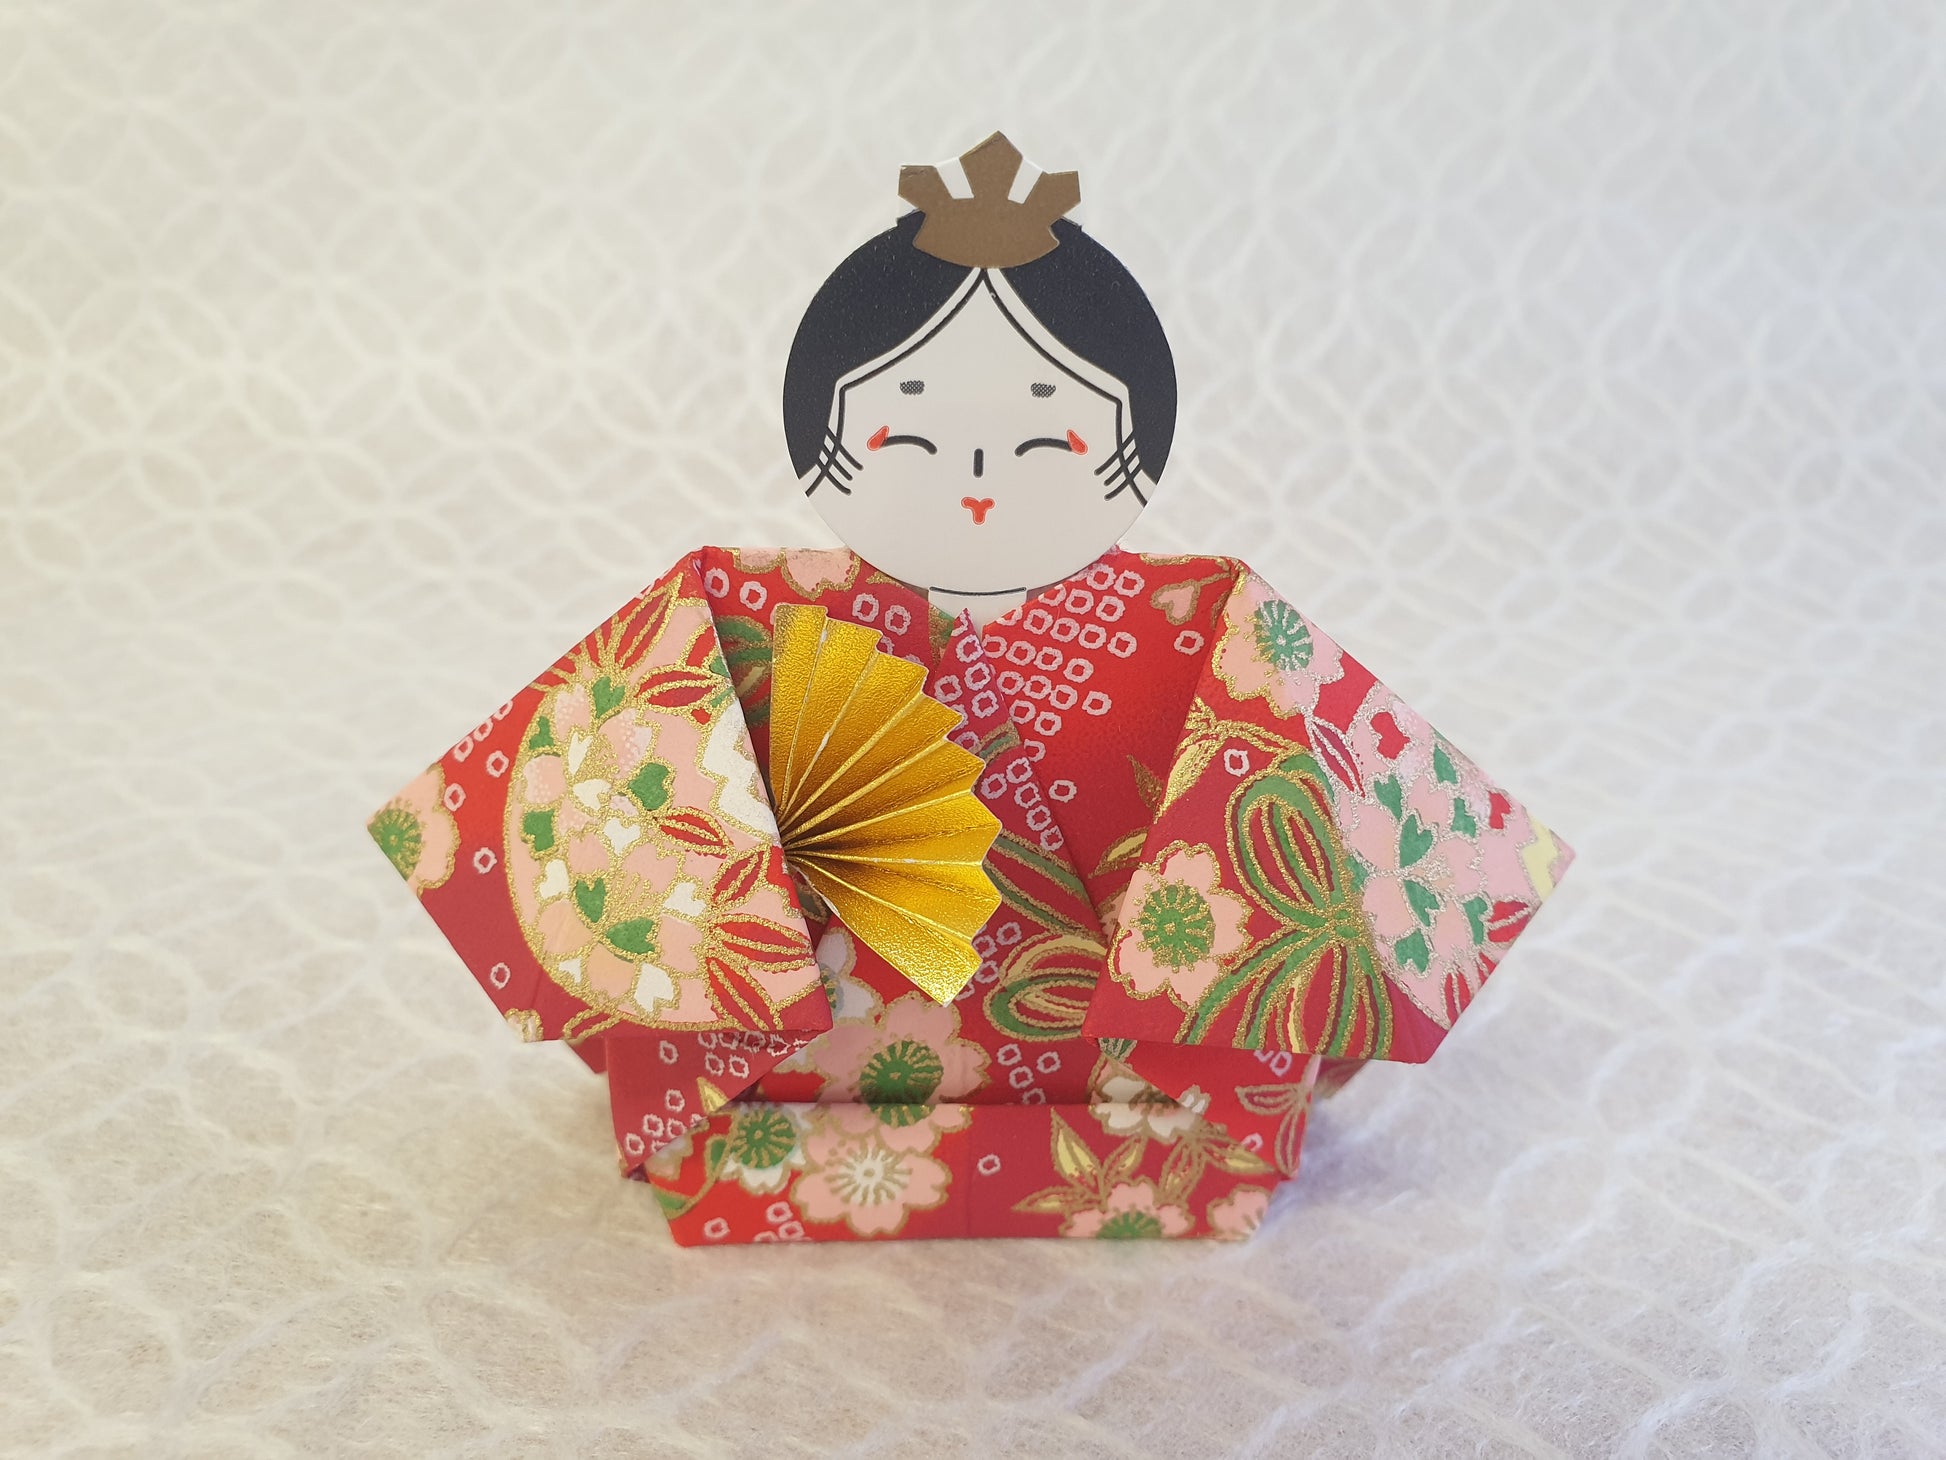 TSUKUTTE-YA’s Hina Dolls (ひな人形) Origami DIY kit is based on Japanese traditional “Girls day festival”. Hina Dolls Origami DIY kit is designed by Ochanomizu Origami Kaikan a Japanese original Origami creator. Send from Japan, make Japan quality DIY kit at home to add a touch of Japan in your daily life.